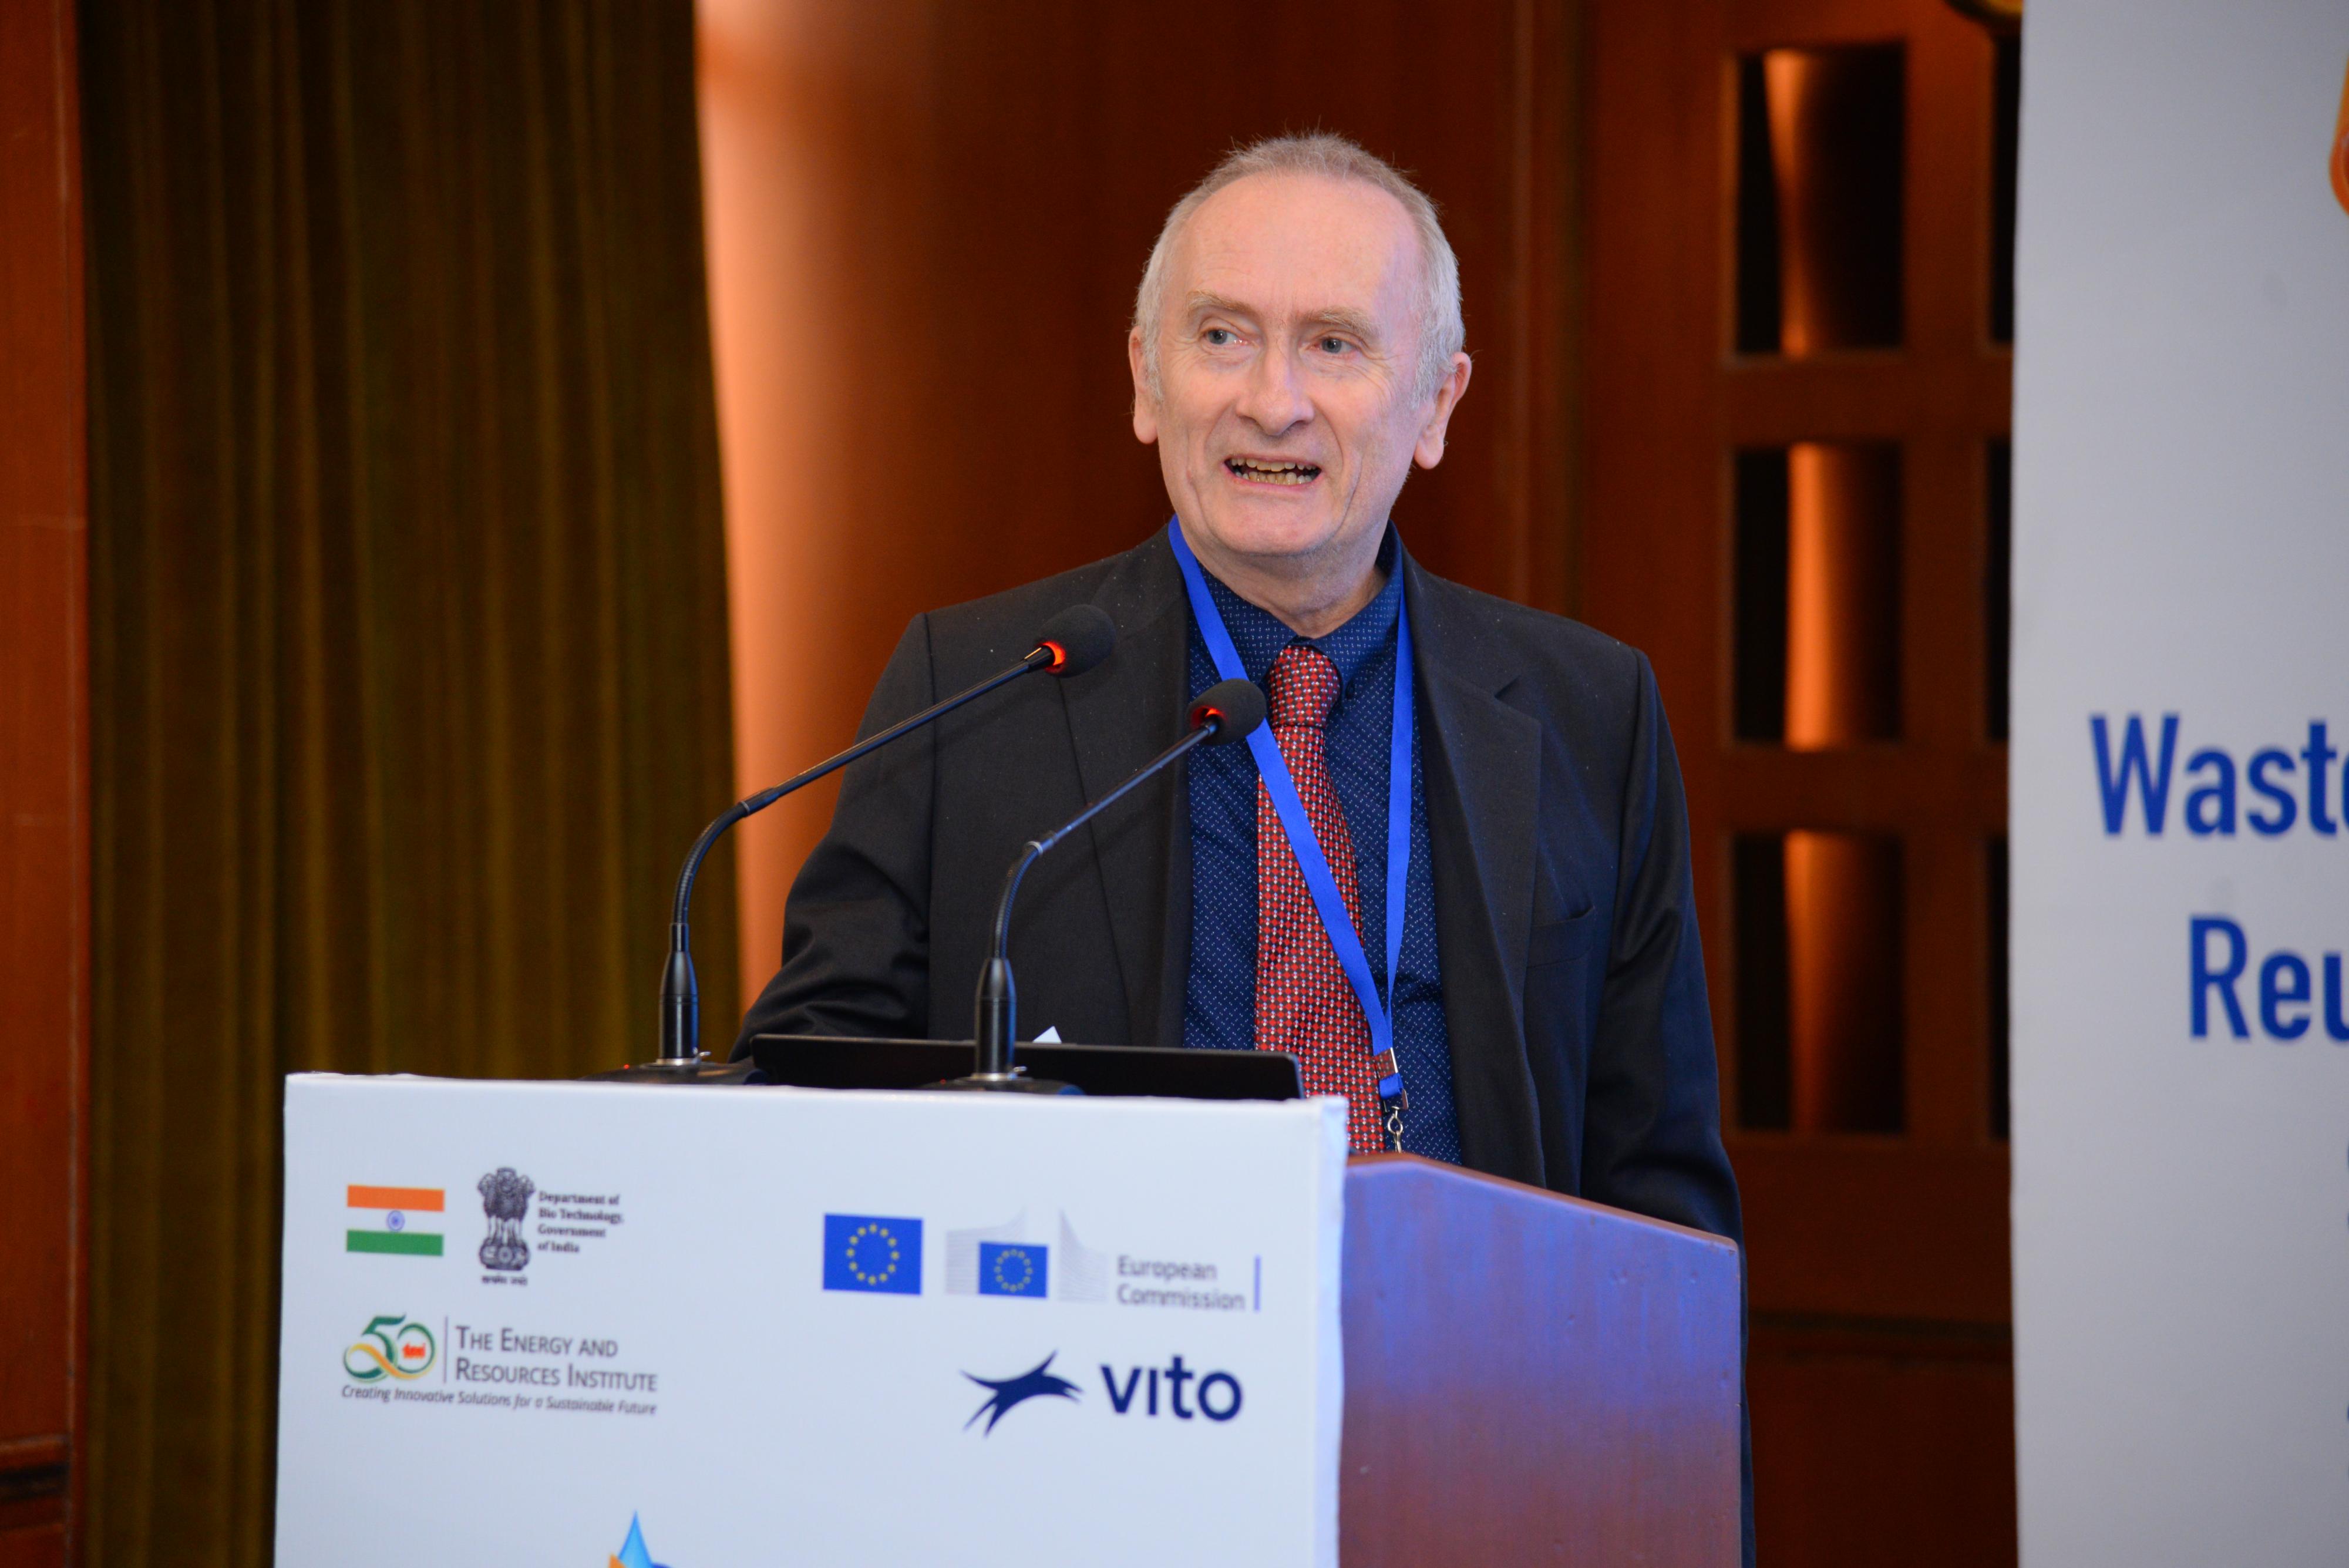 Dr. Paul Campling, International Business Development Manager at VITO and Project Coordinator of Pavitra Ganga 